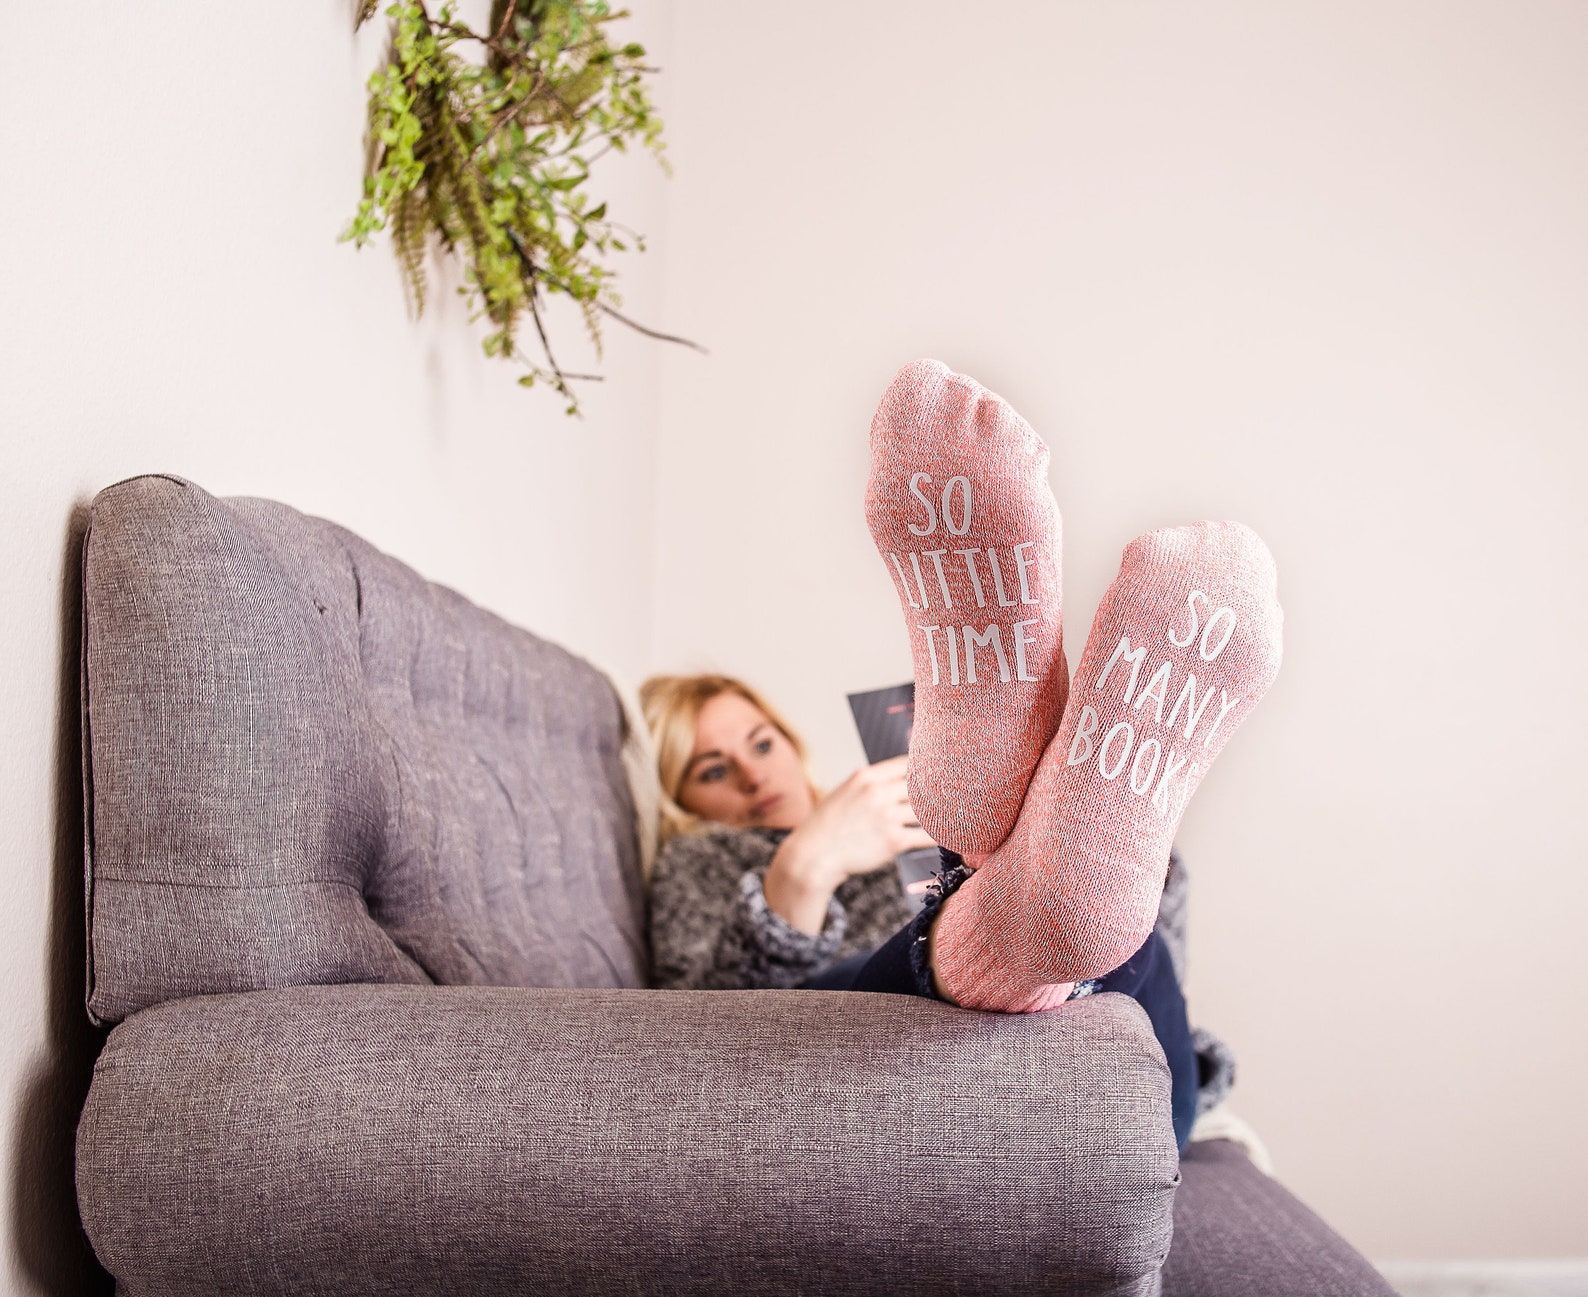 a woman lying on a couch with pink socks that say "so little time" on one foot, and " "so many books" on the other